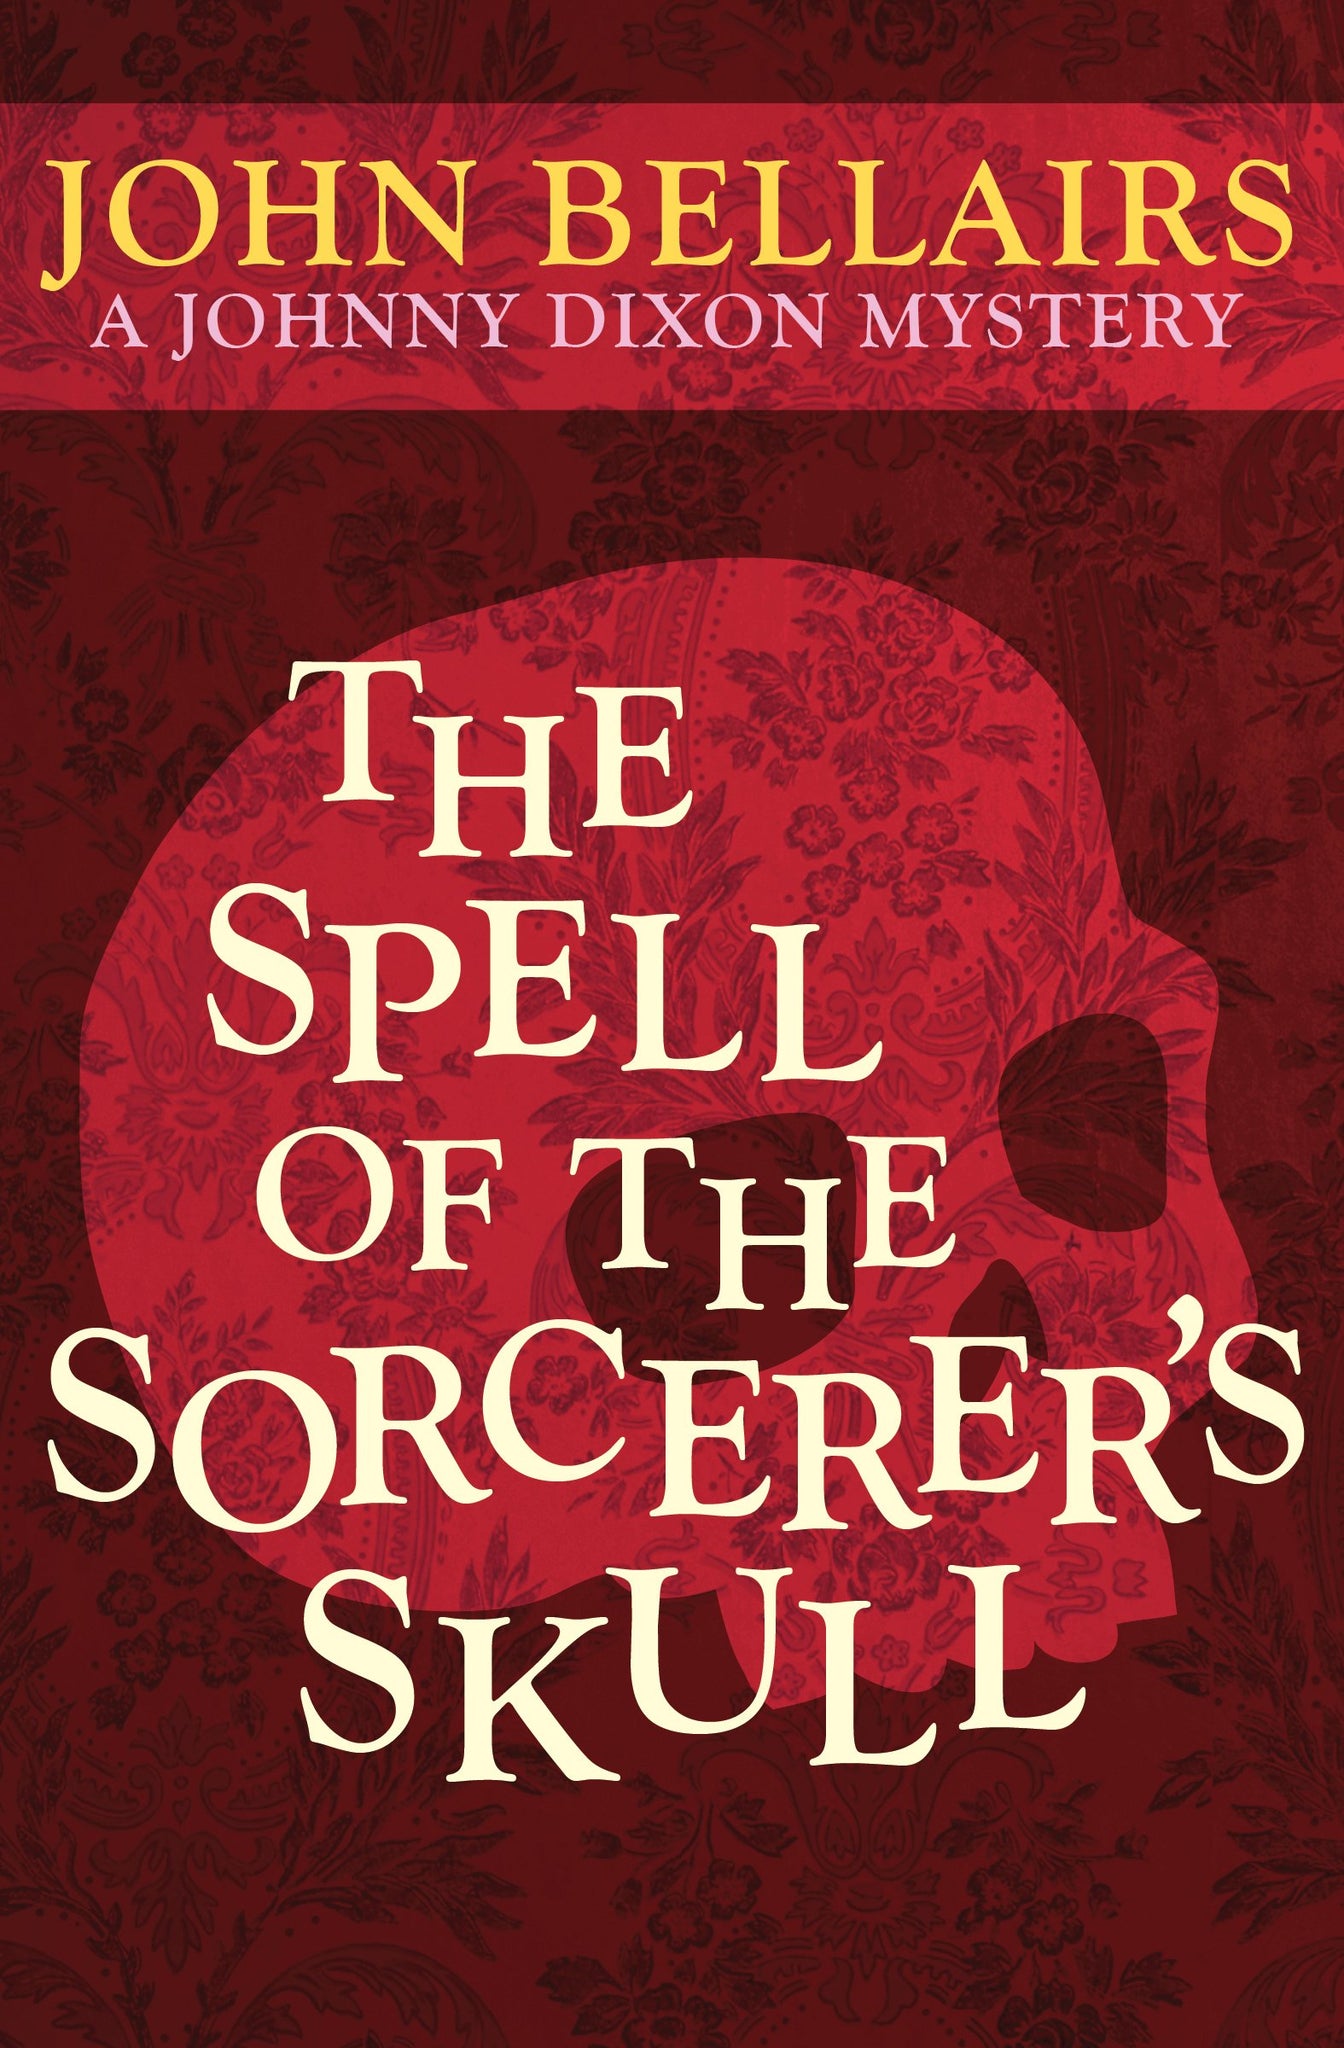 Johnny Dixon #3 : The Spell of the Sorcerer's Skull by John Bellairs